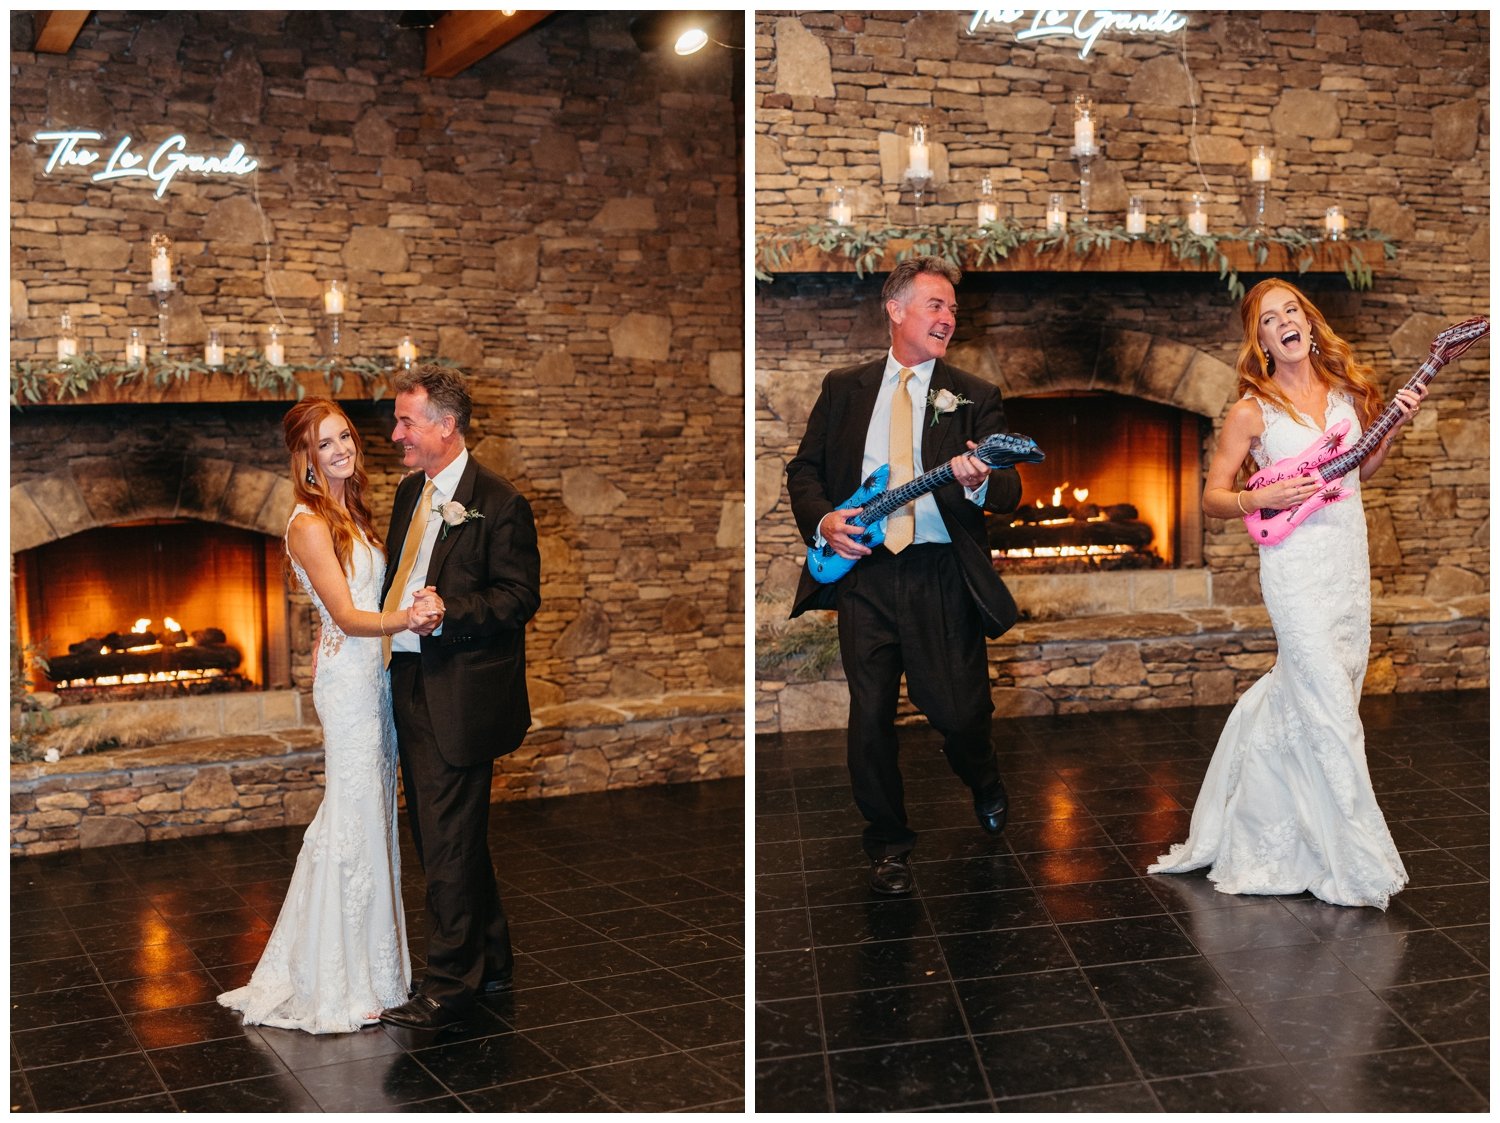 The fother daughter dance at the mountain wedding venue